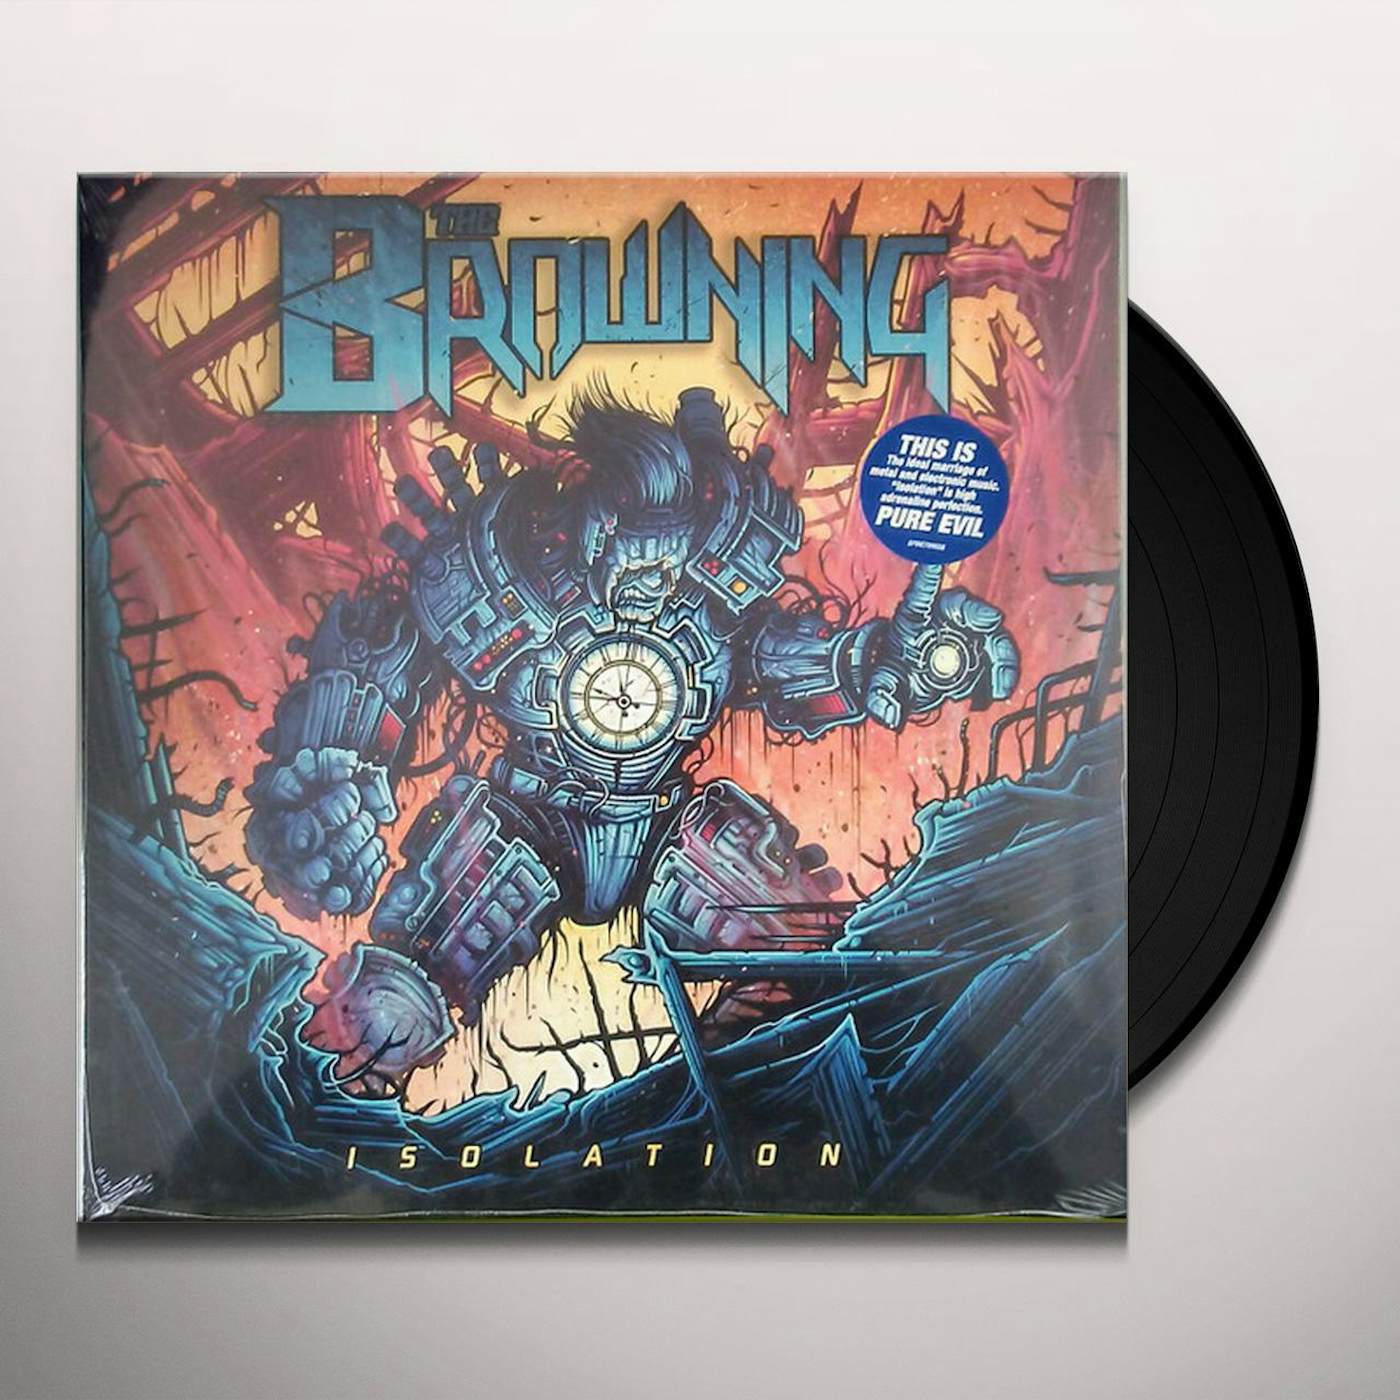 The Browning Isolation Vinyl Record